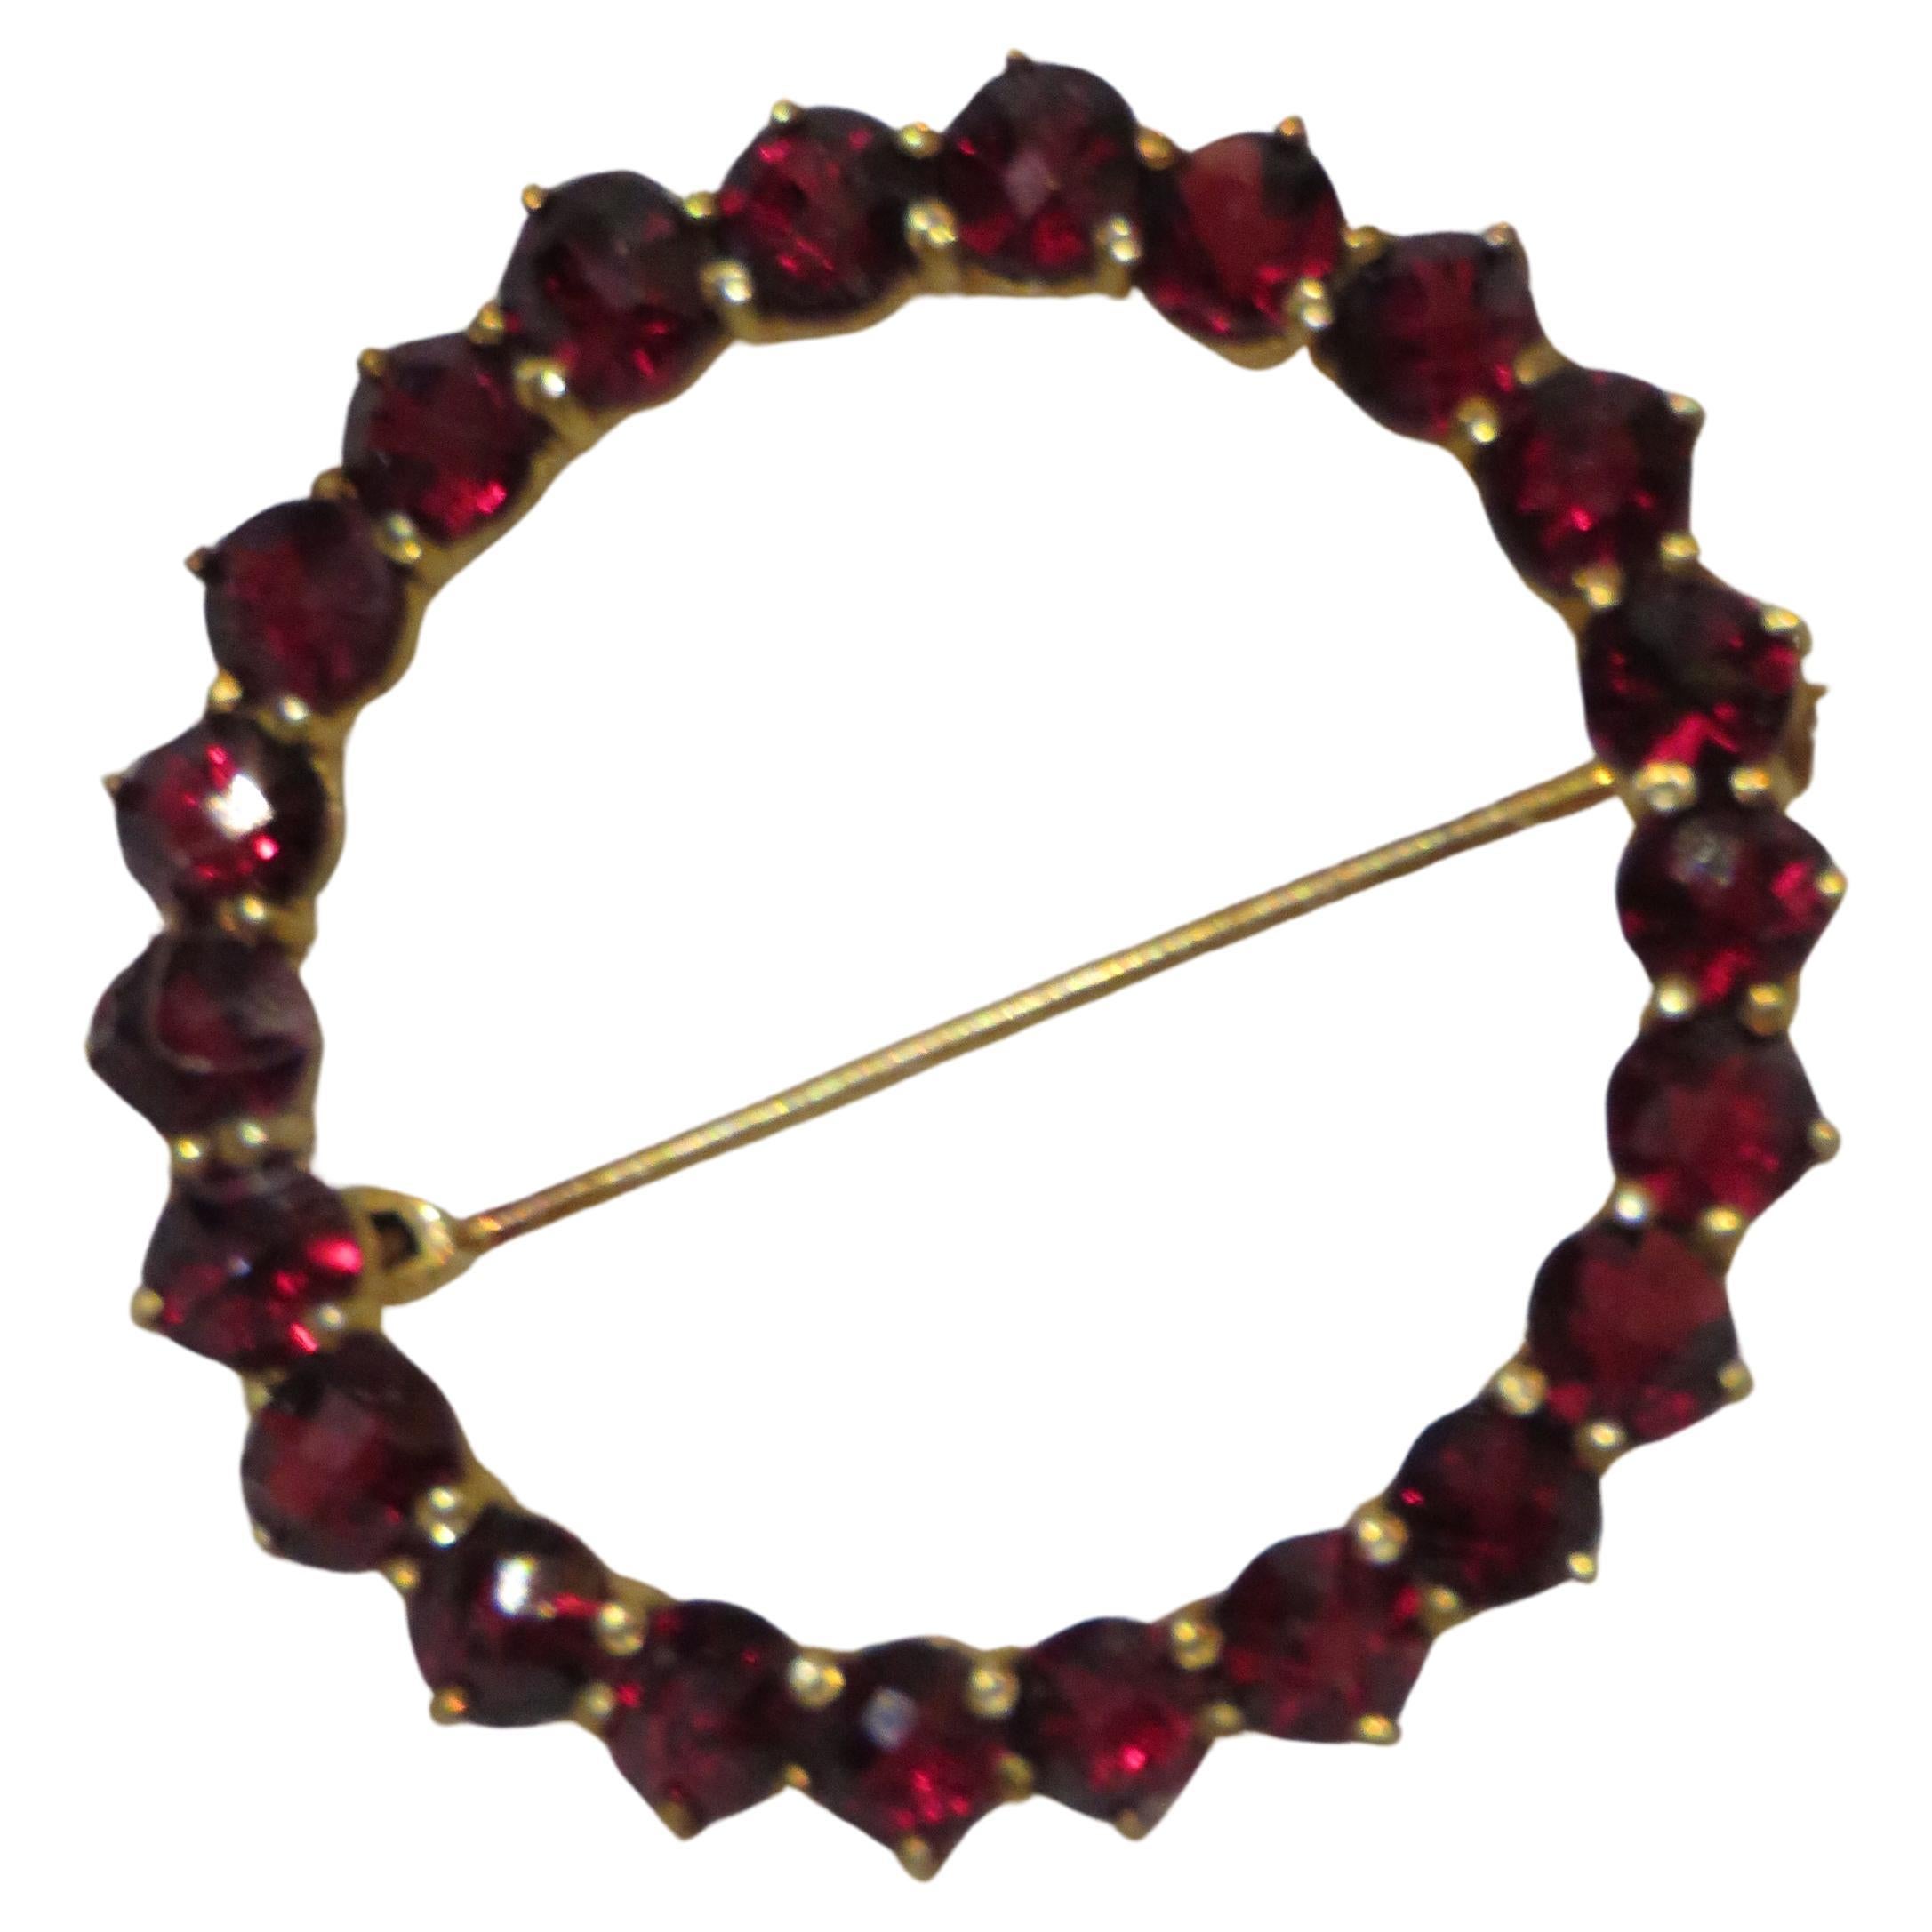 Magnificent Rare NYC Estate Gold Fancy 5CT Glittering Red Garnet Brooch Pin For Sale